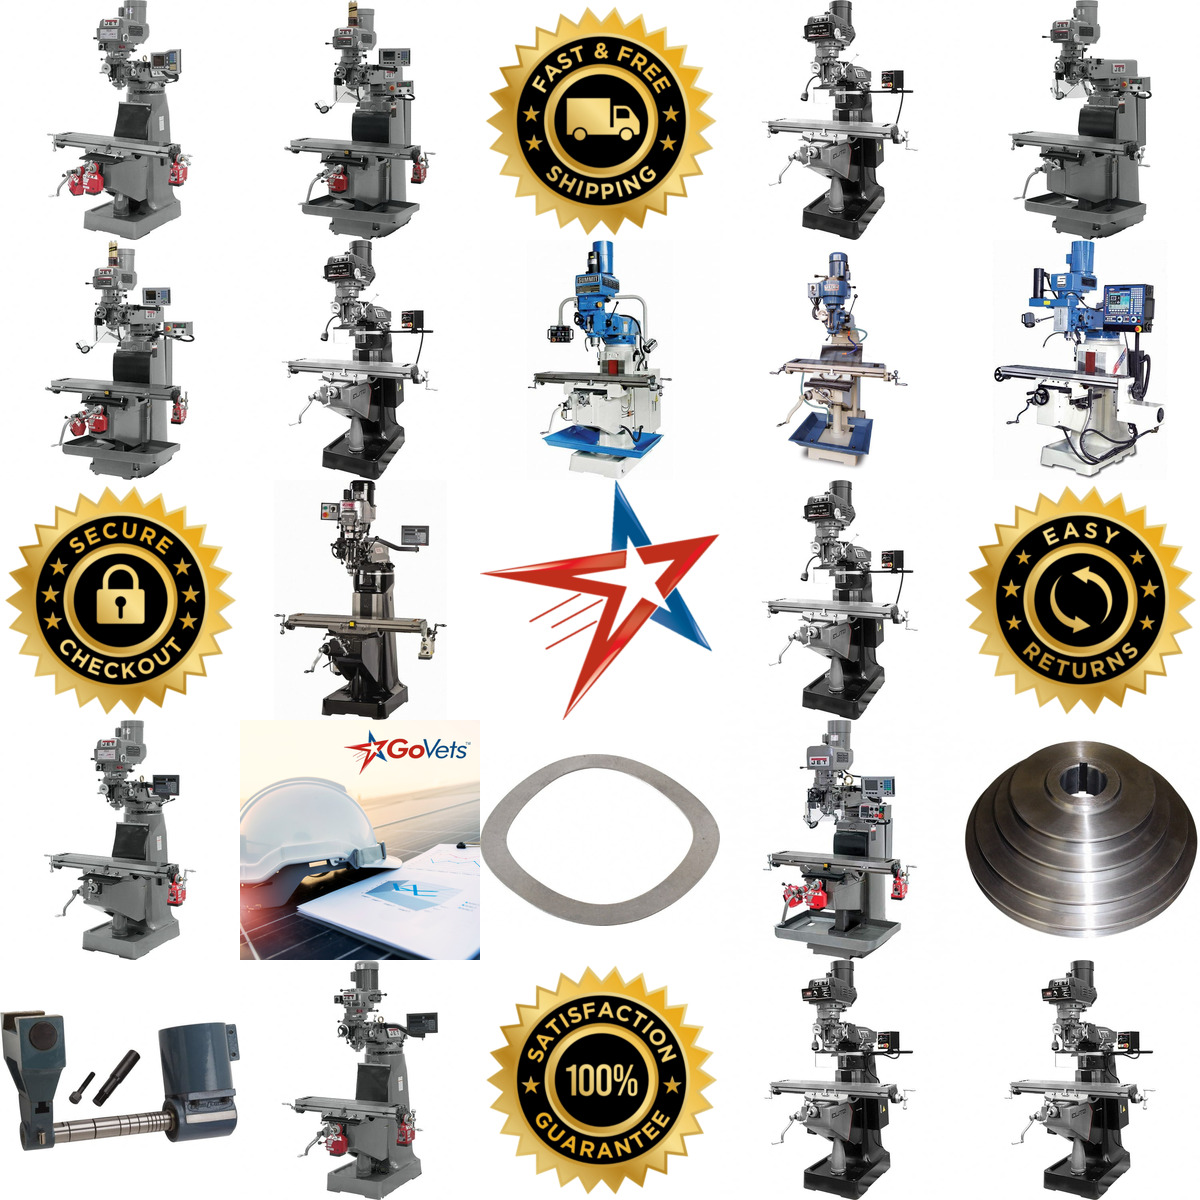 A selection of Milling Machines products on GoVets